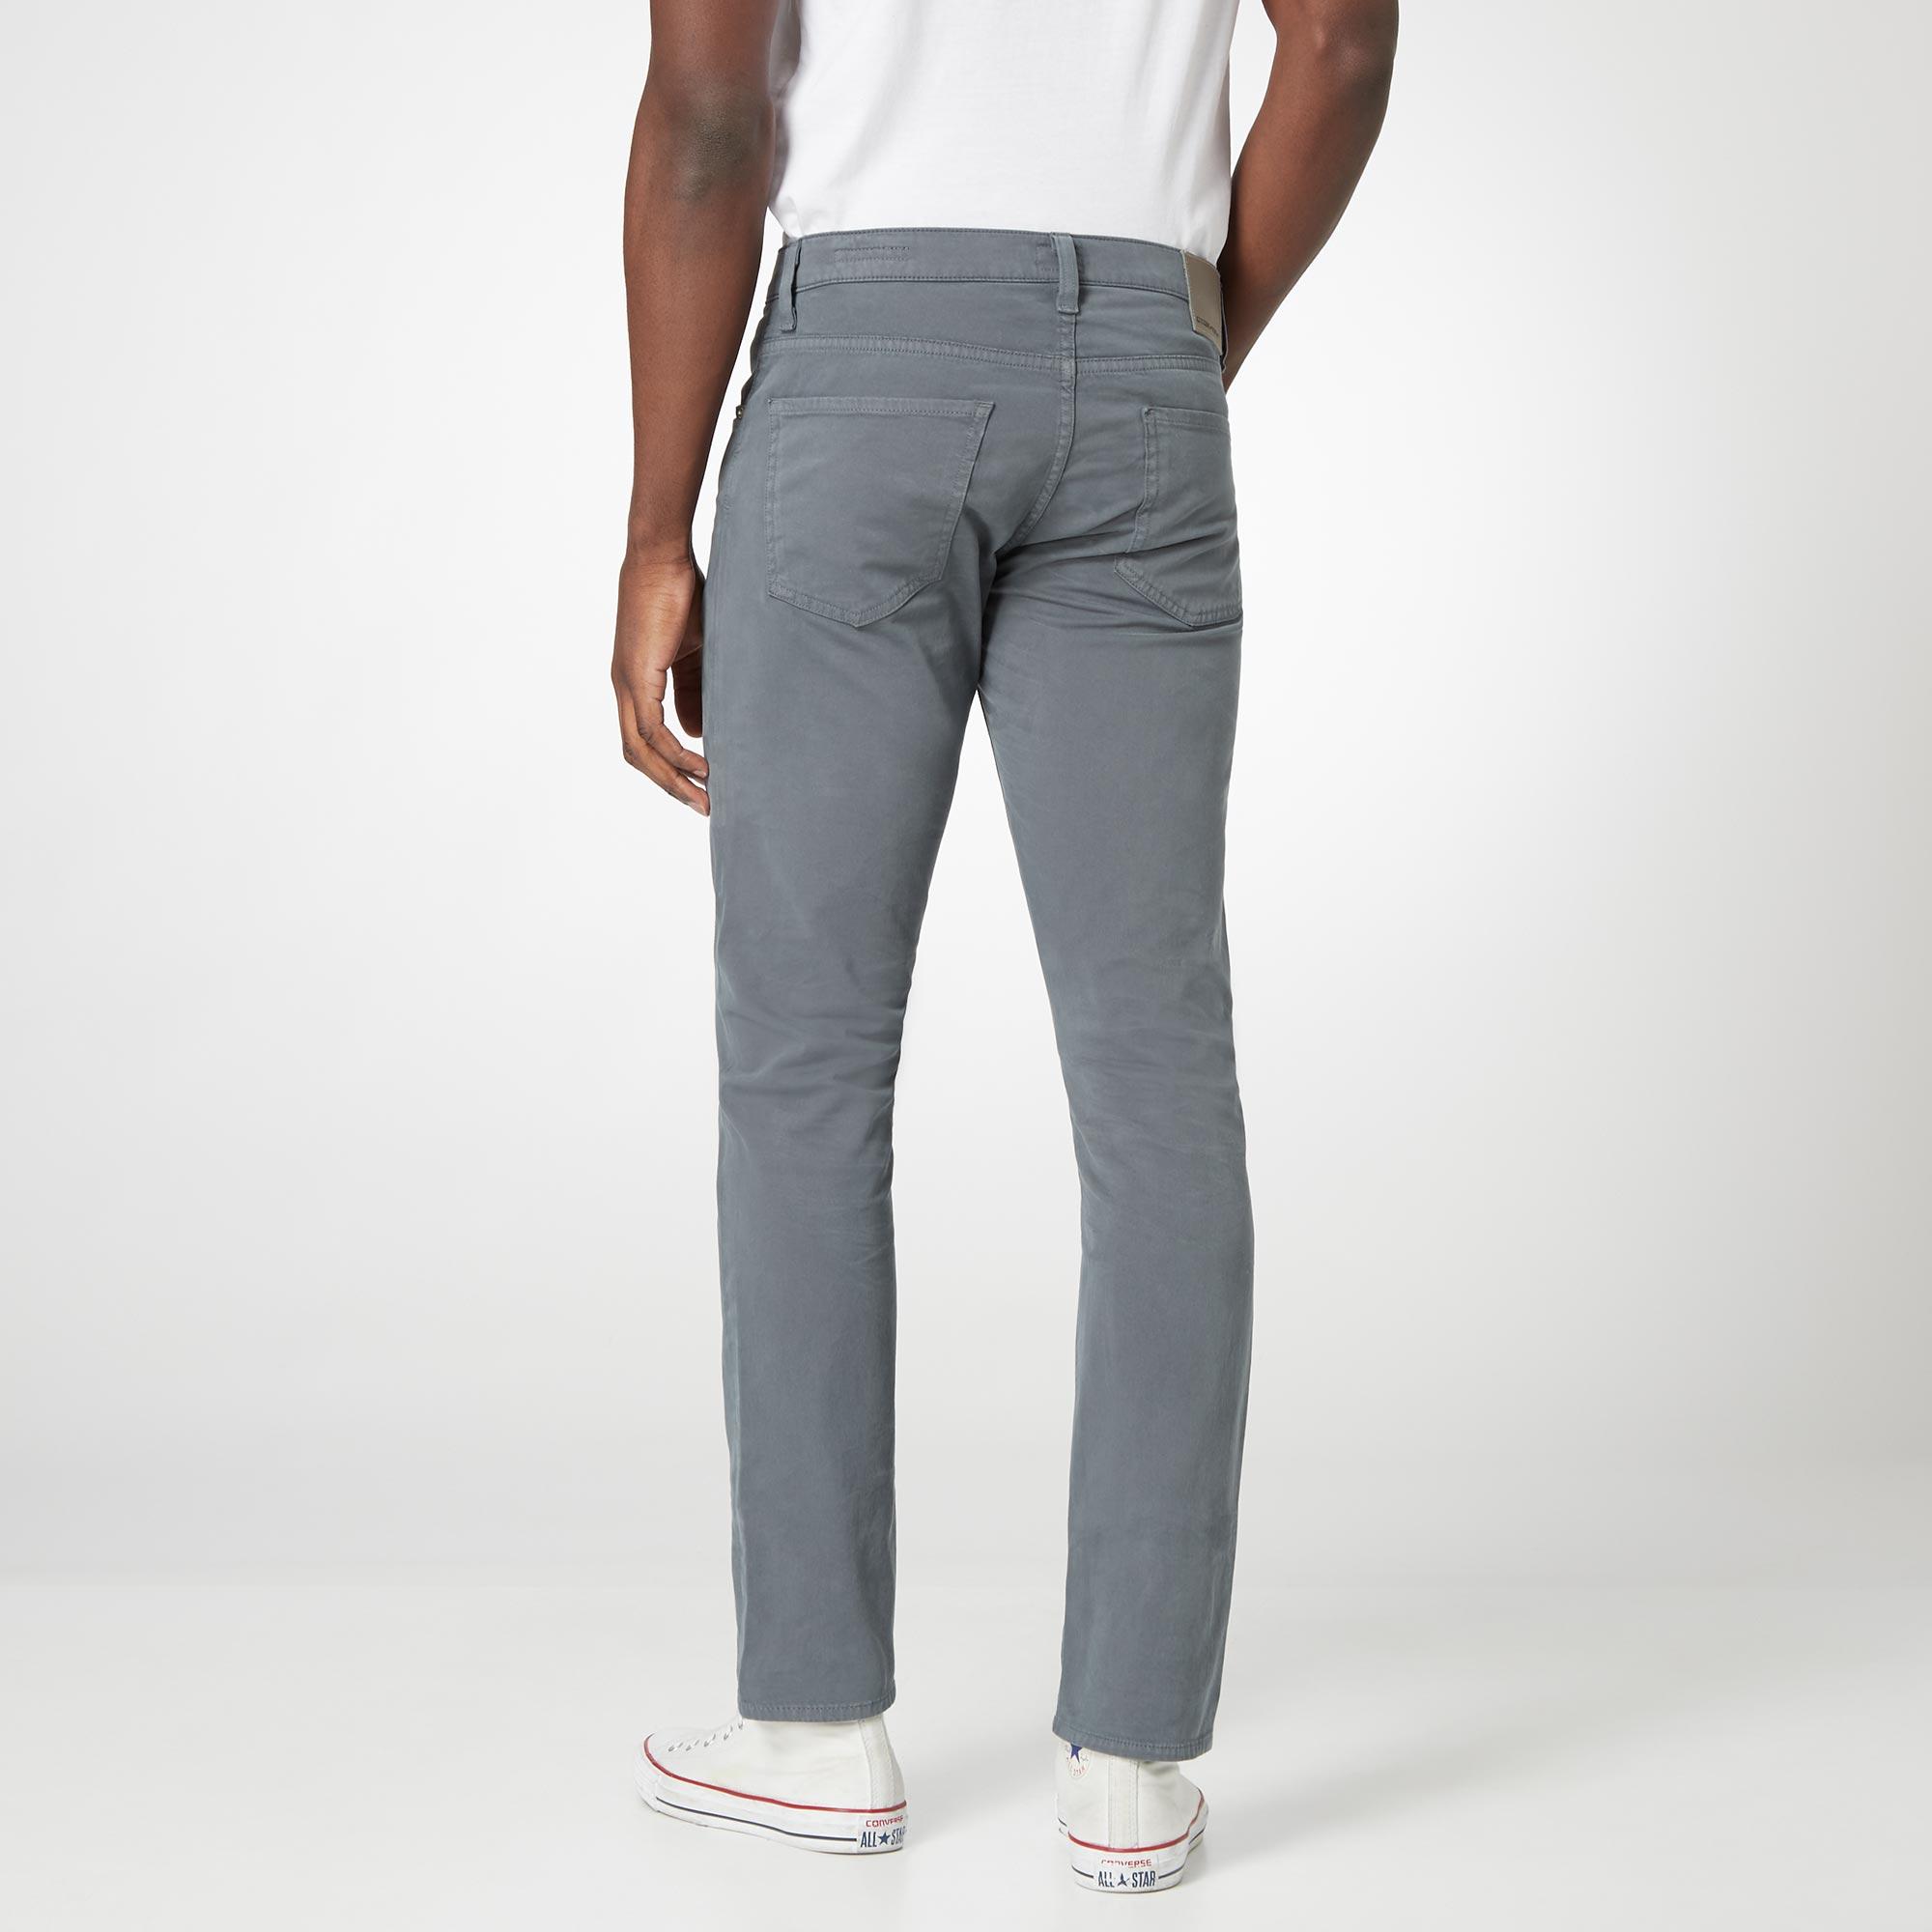 Bowery Jeans